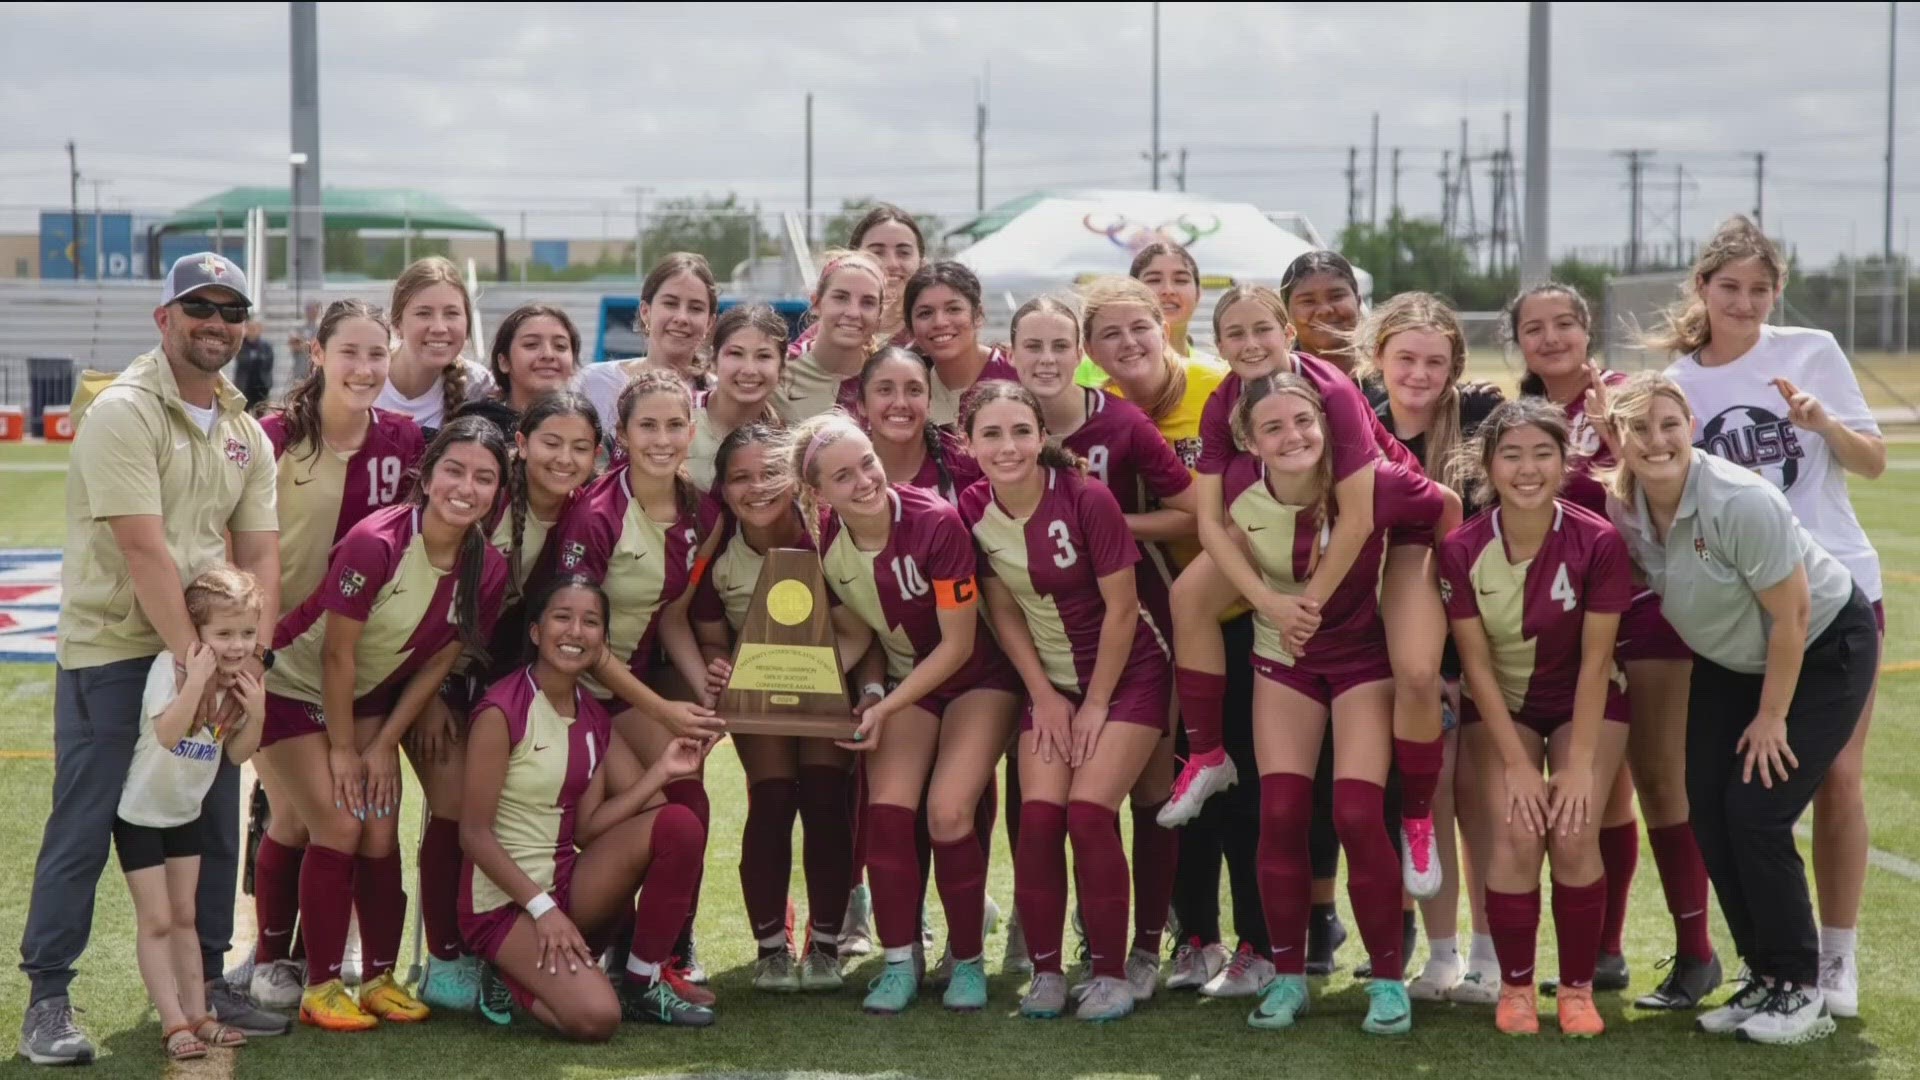 The high school state tournament kicks off on Wednesday in Georgetown. The Rouse team is looking to win their first playoff game since 2018.